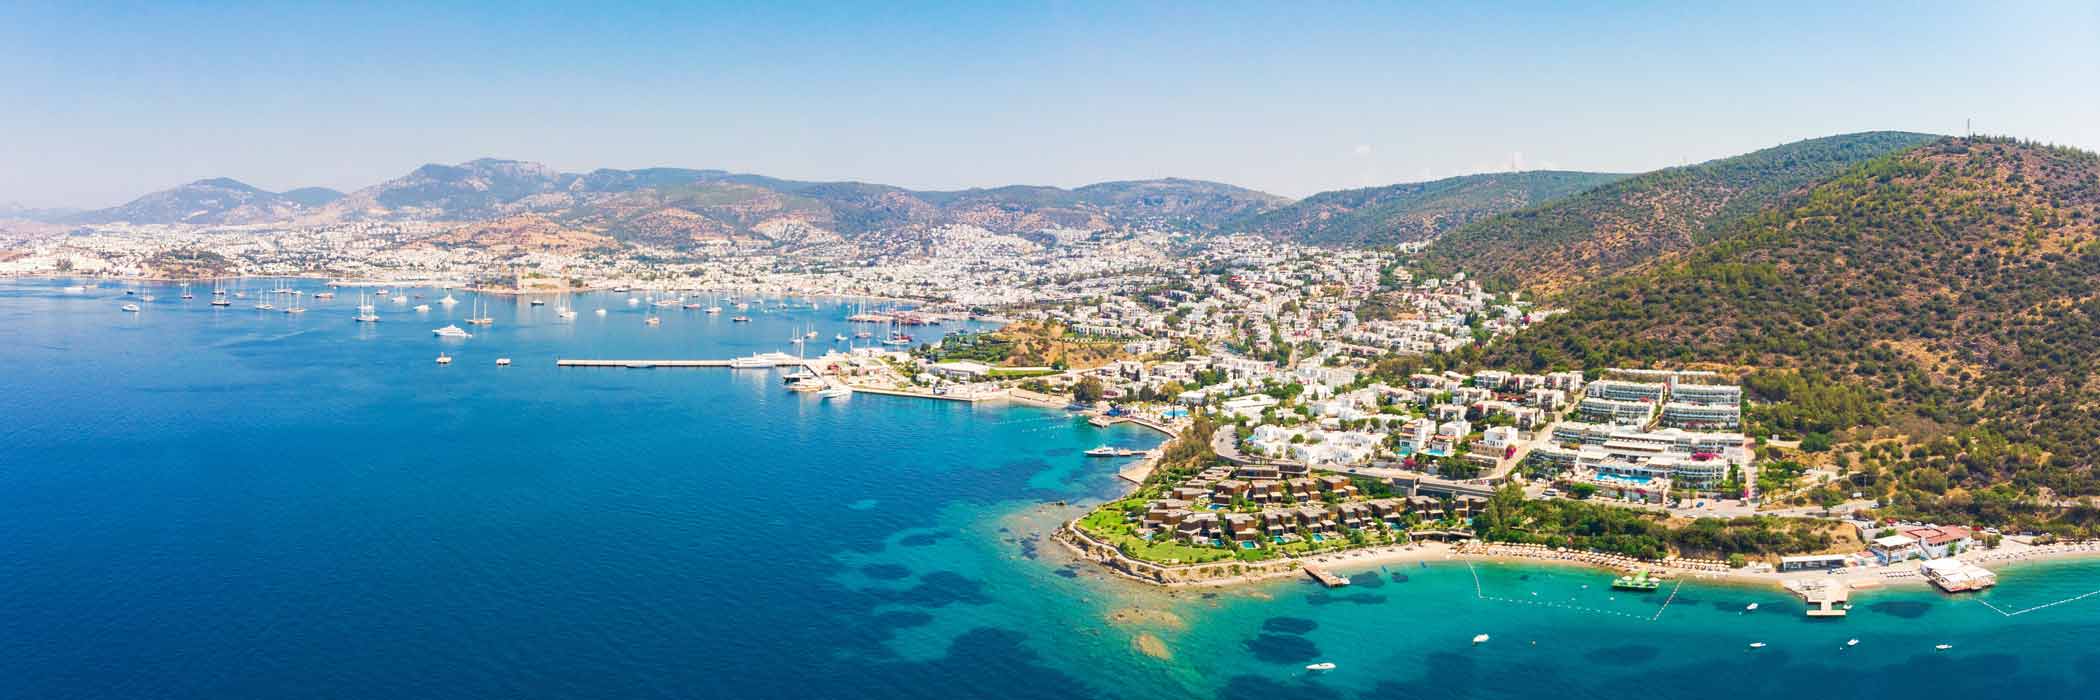 Cheap all inclusive holidays to Turkey